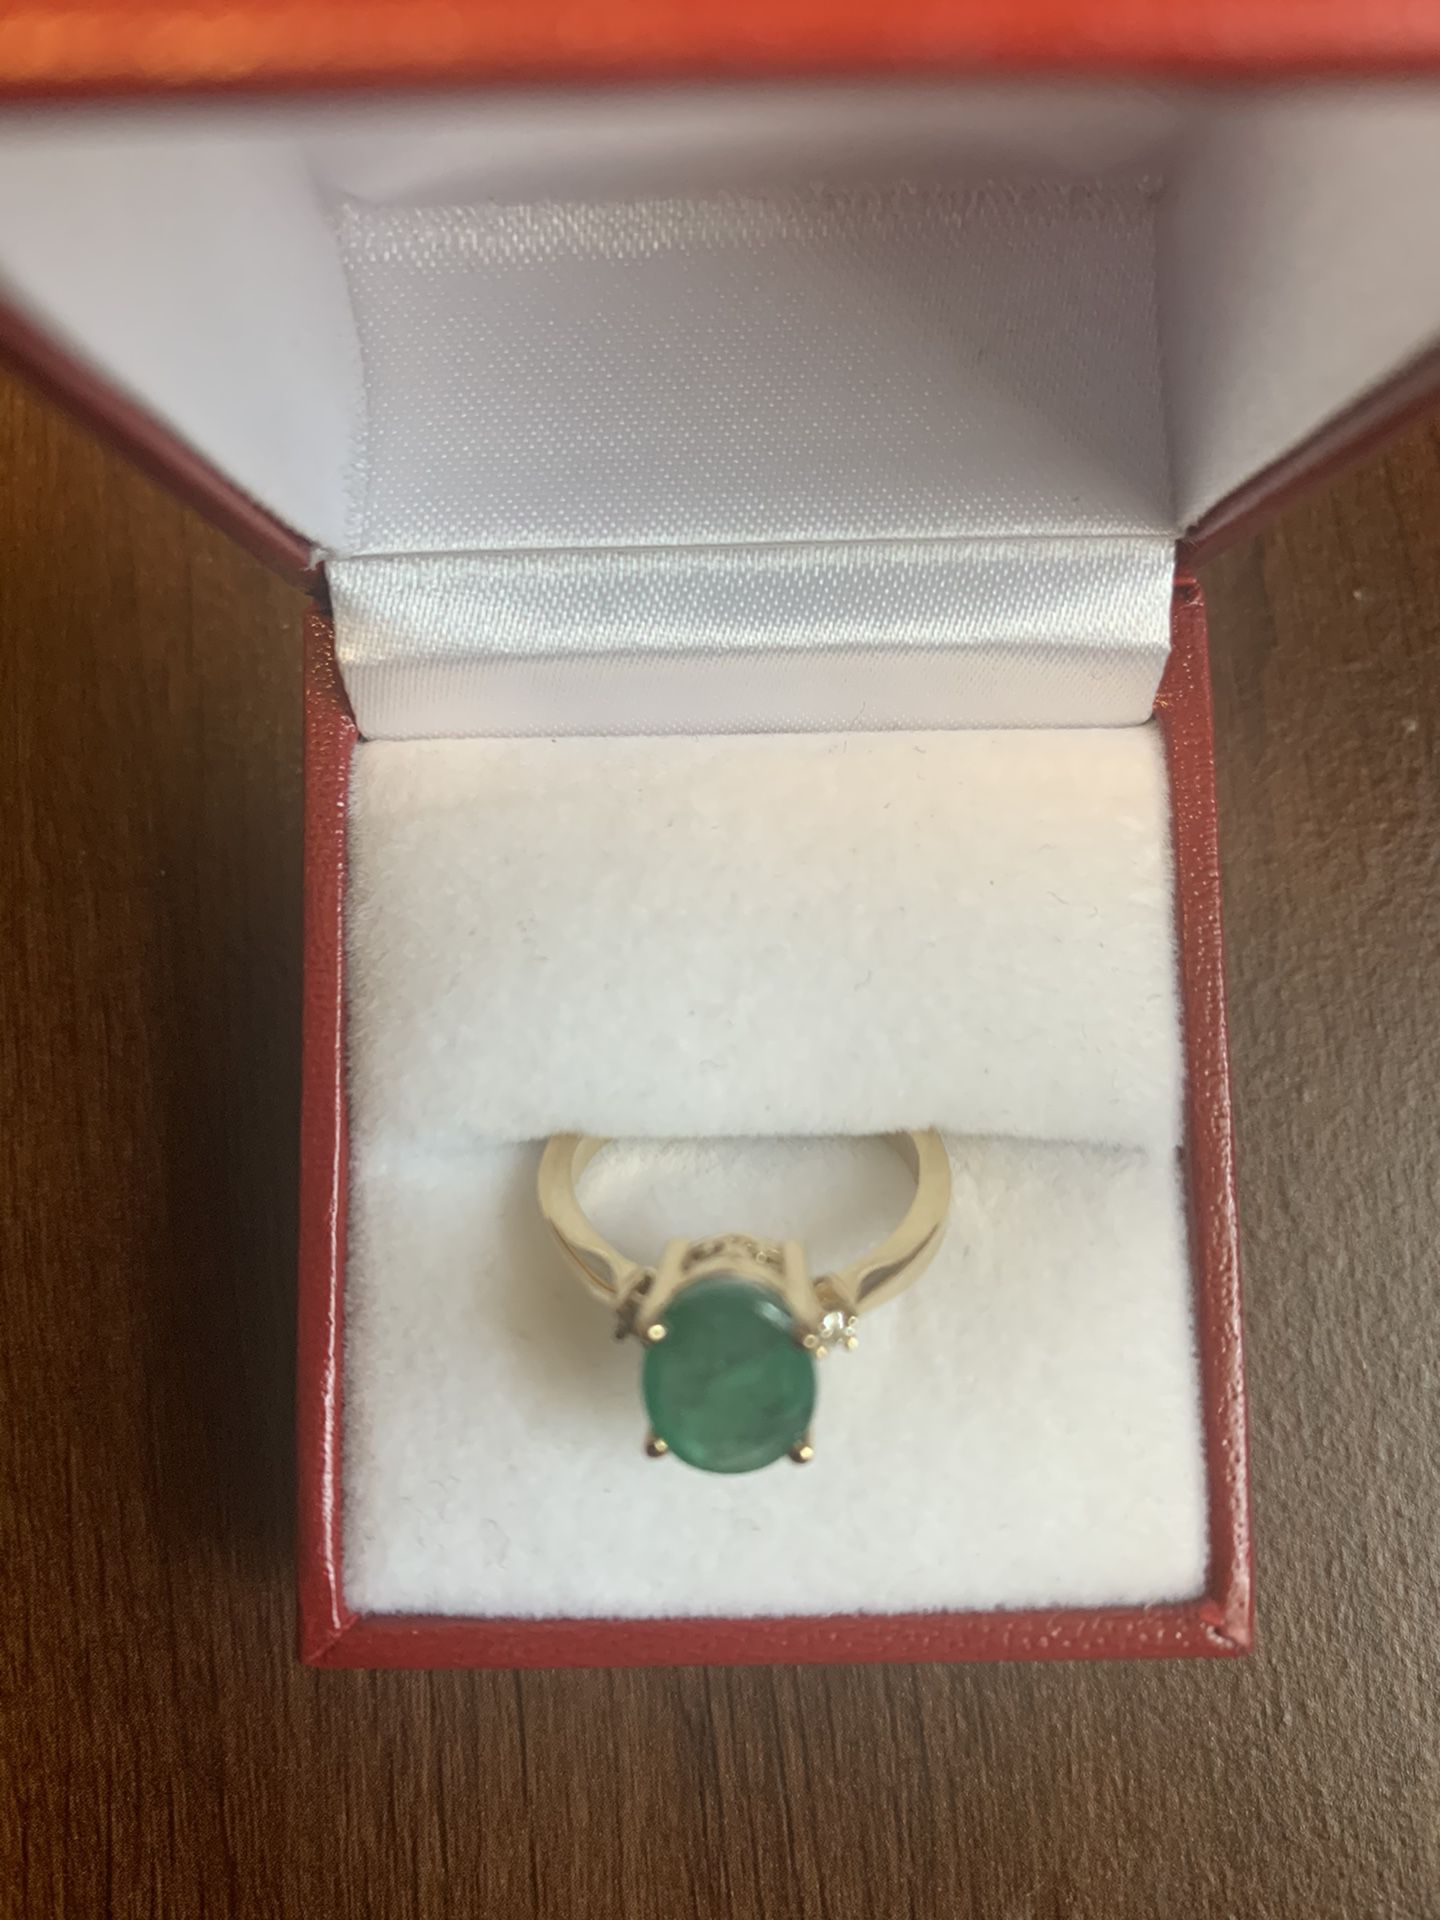 14k Gold Lady Fancy Diamond and Emerald Ring.Size 6 and half